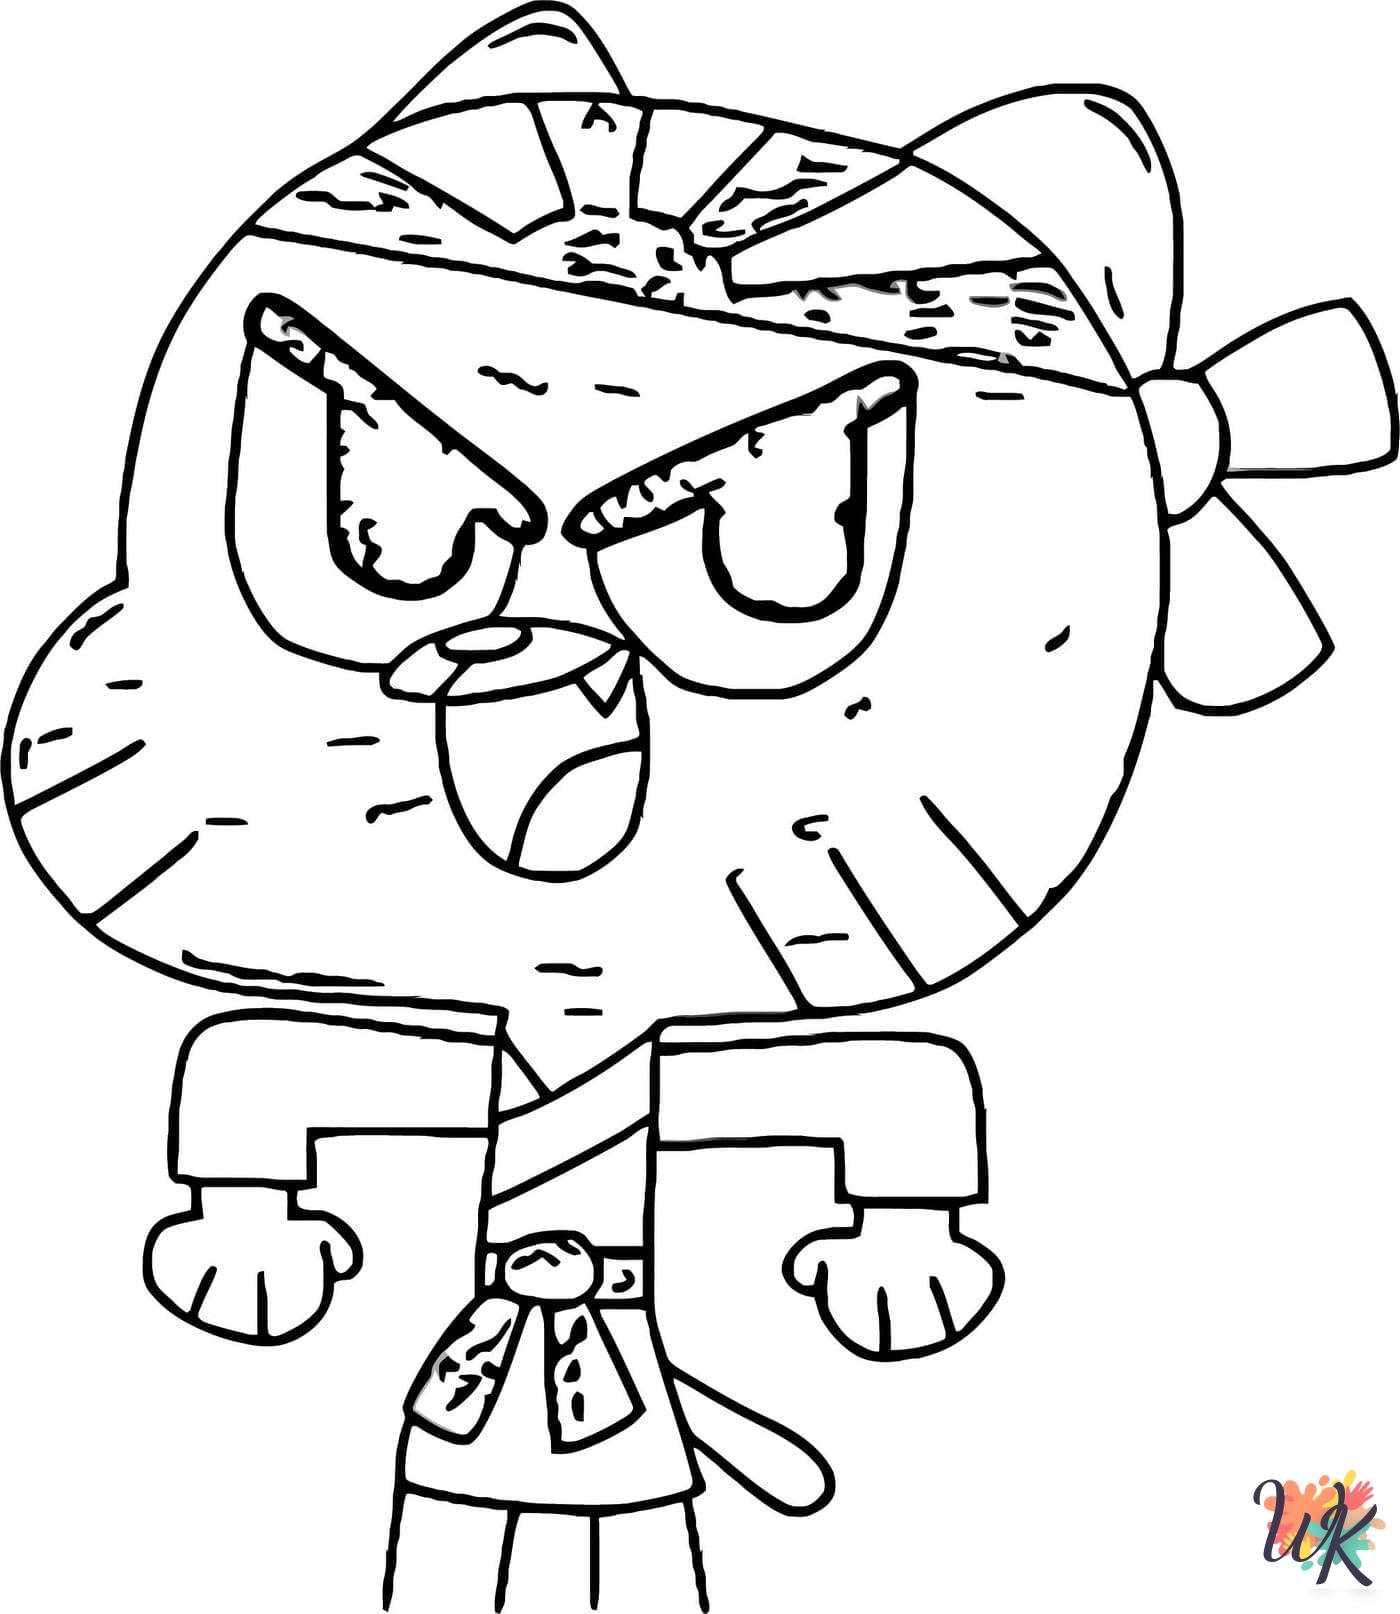 Gumball coloring pages for adults easy 3